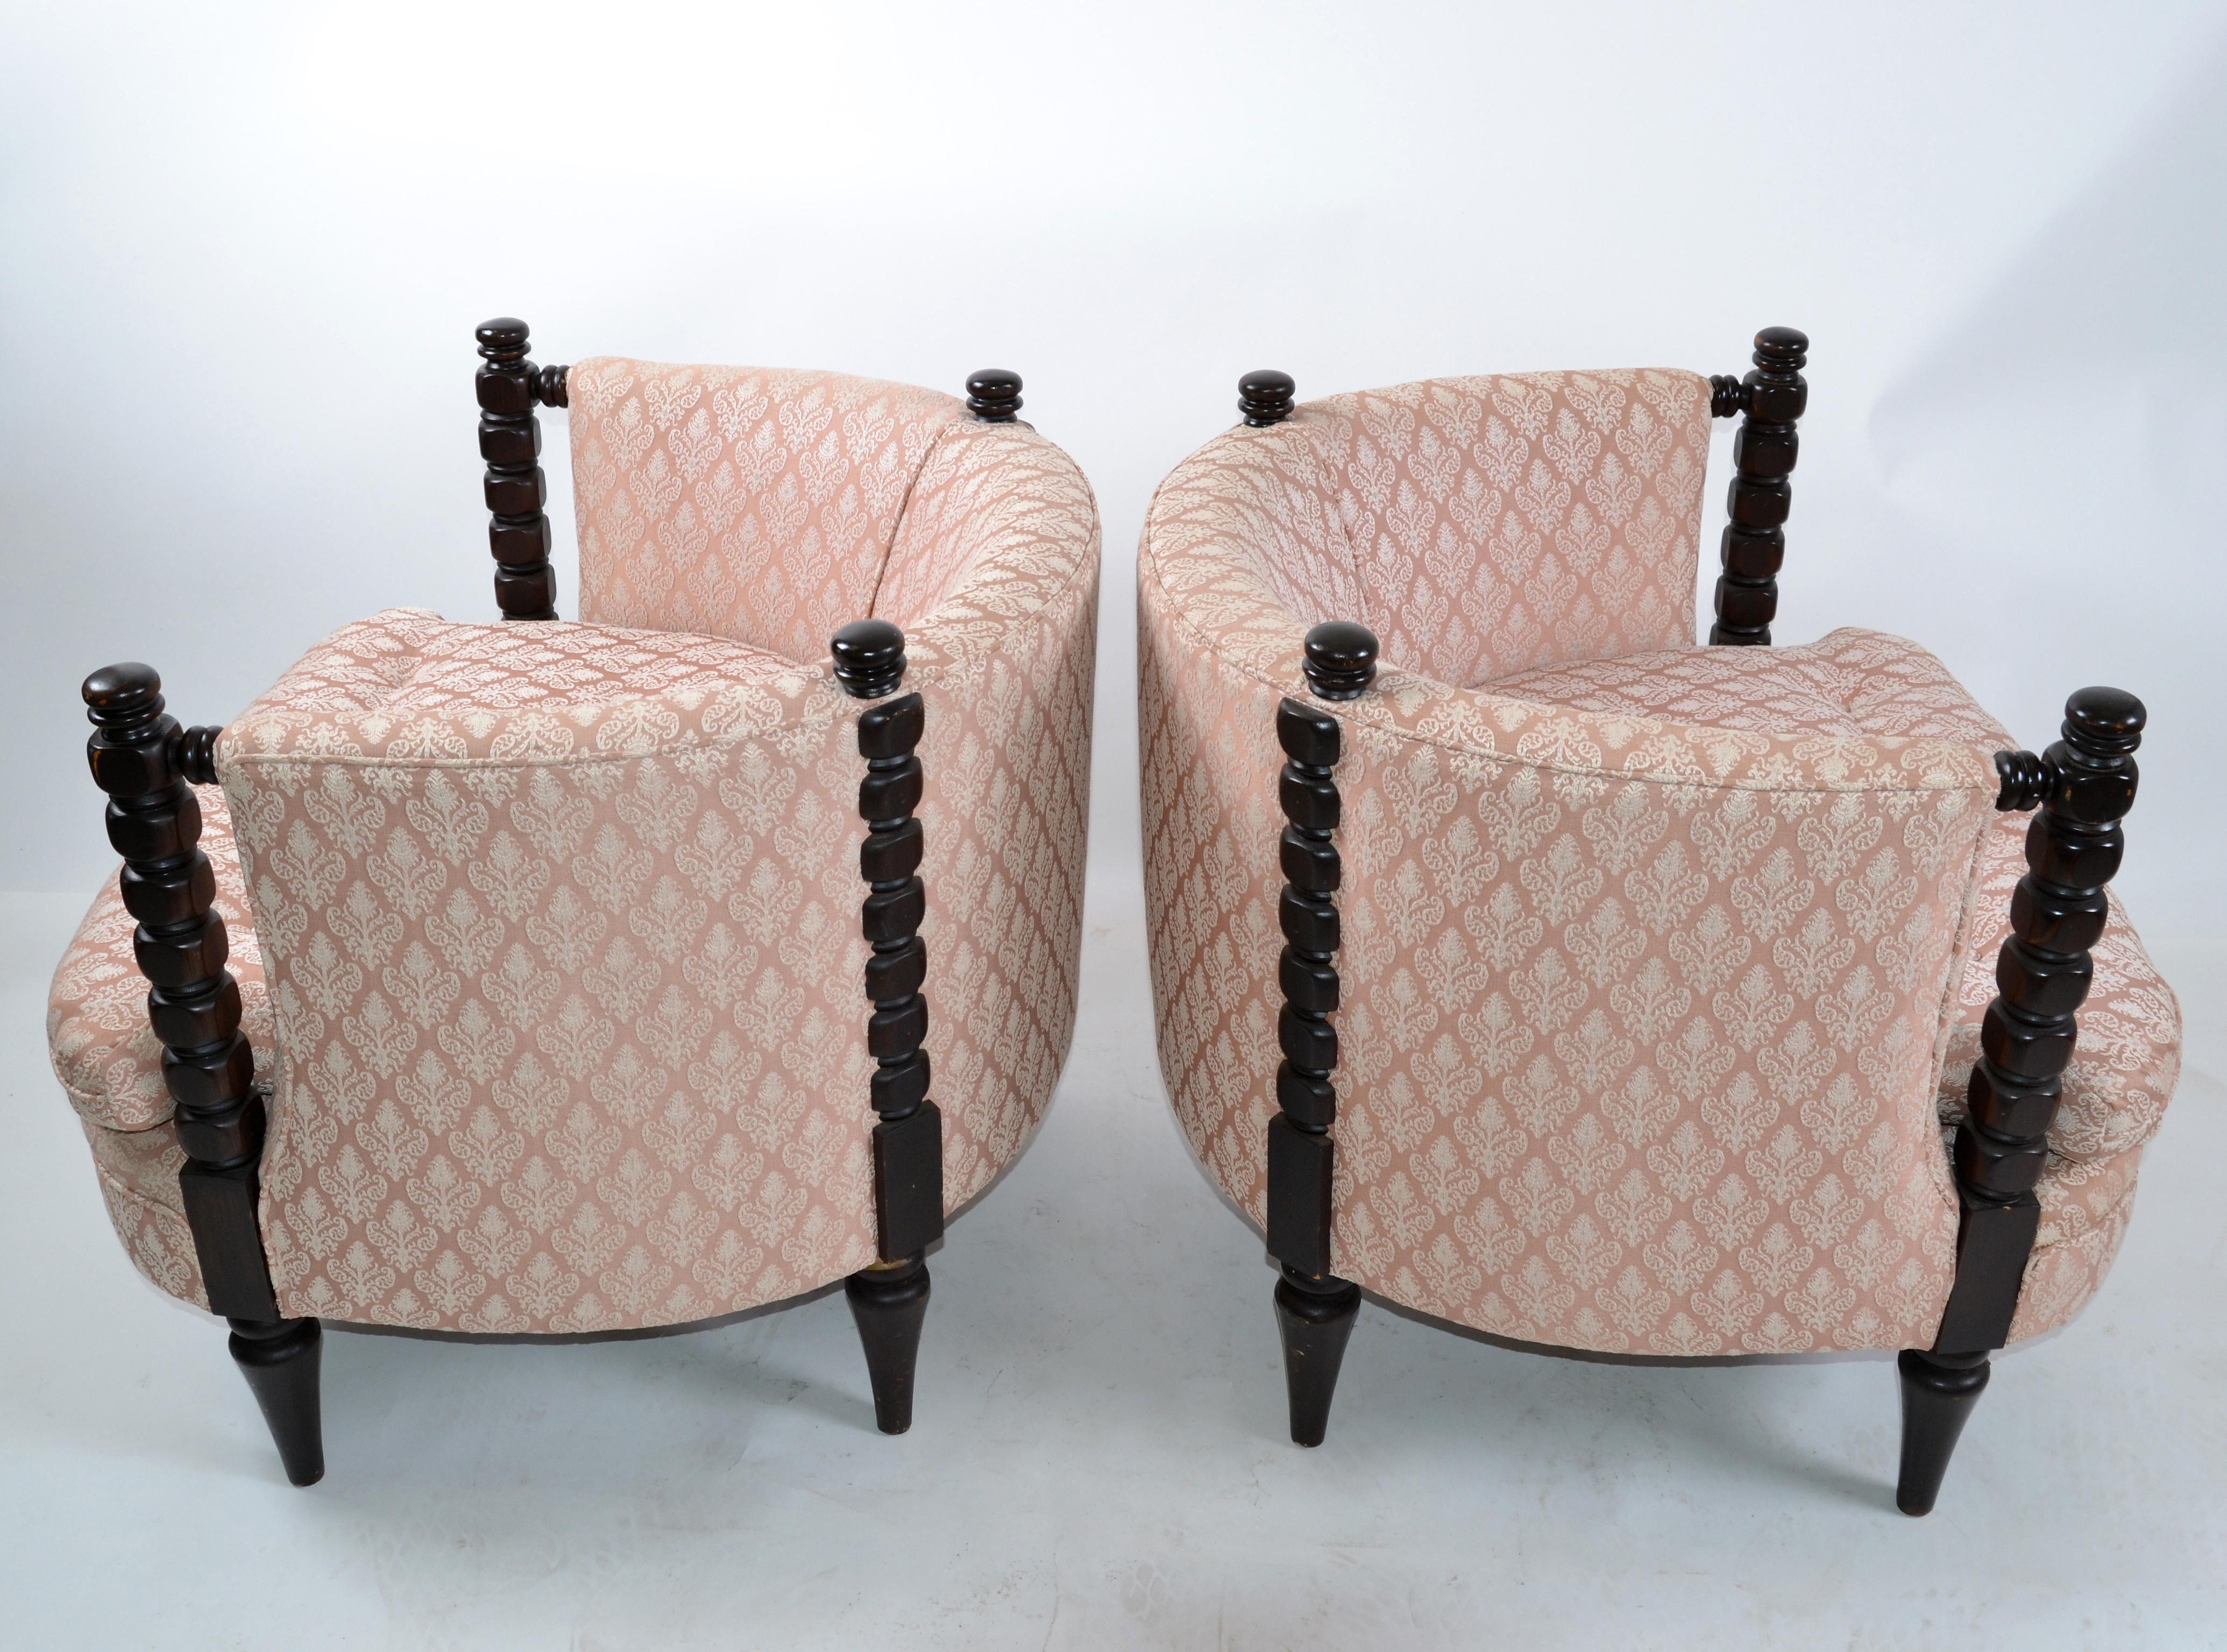 1950s Turned Wood and Tufted Fabric Upholstery Barrel Chairs, Club Chairs, Pair 3